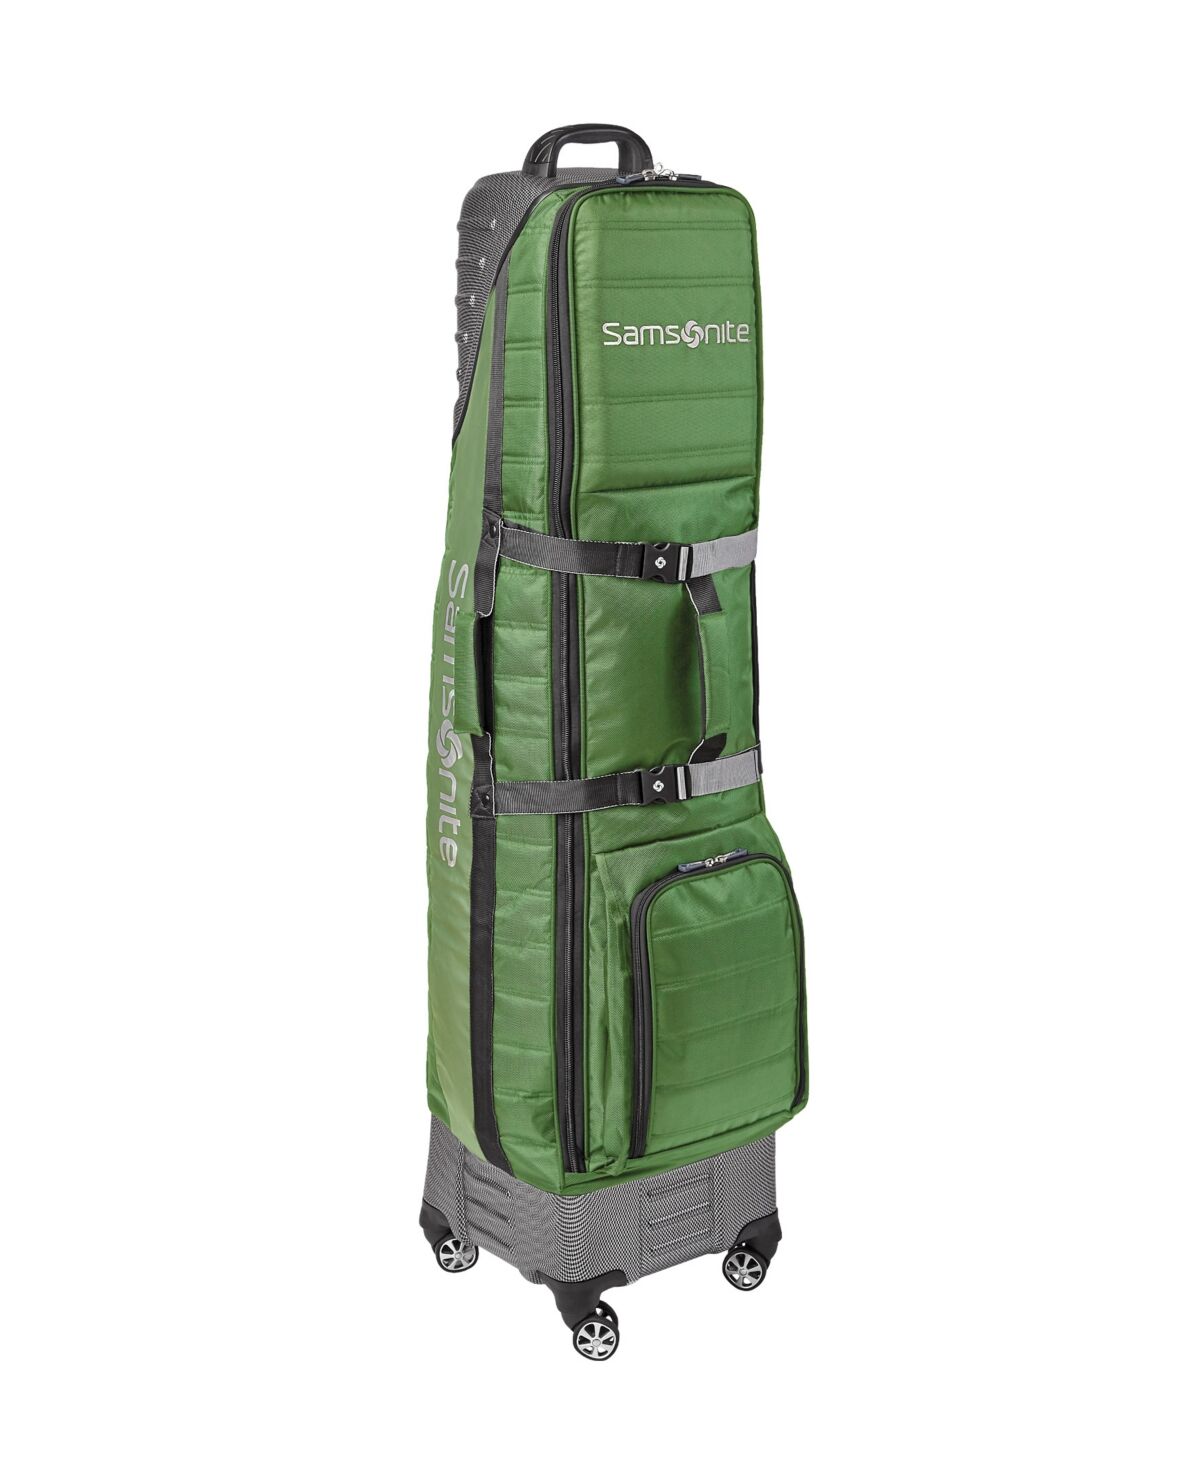 Samsonite 'The Protector' Hard and Soft Sided Golf Travel Cover - Green